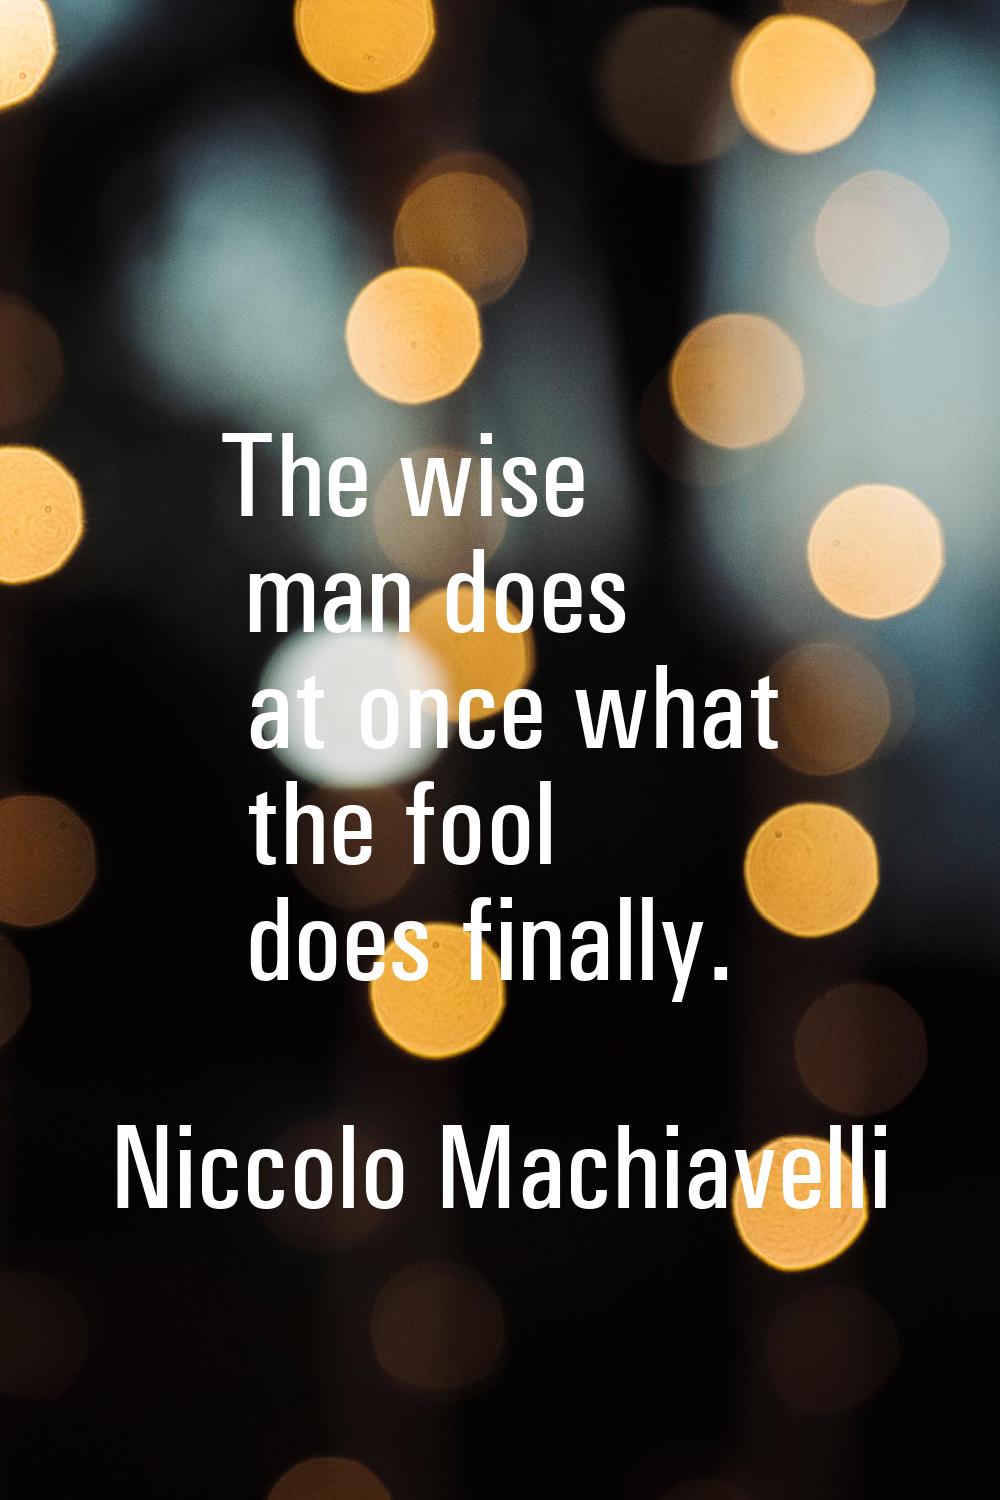 The wise man does at once what the fool does finally.